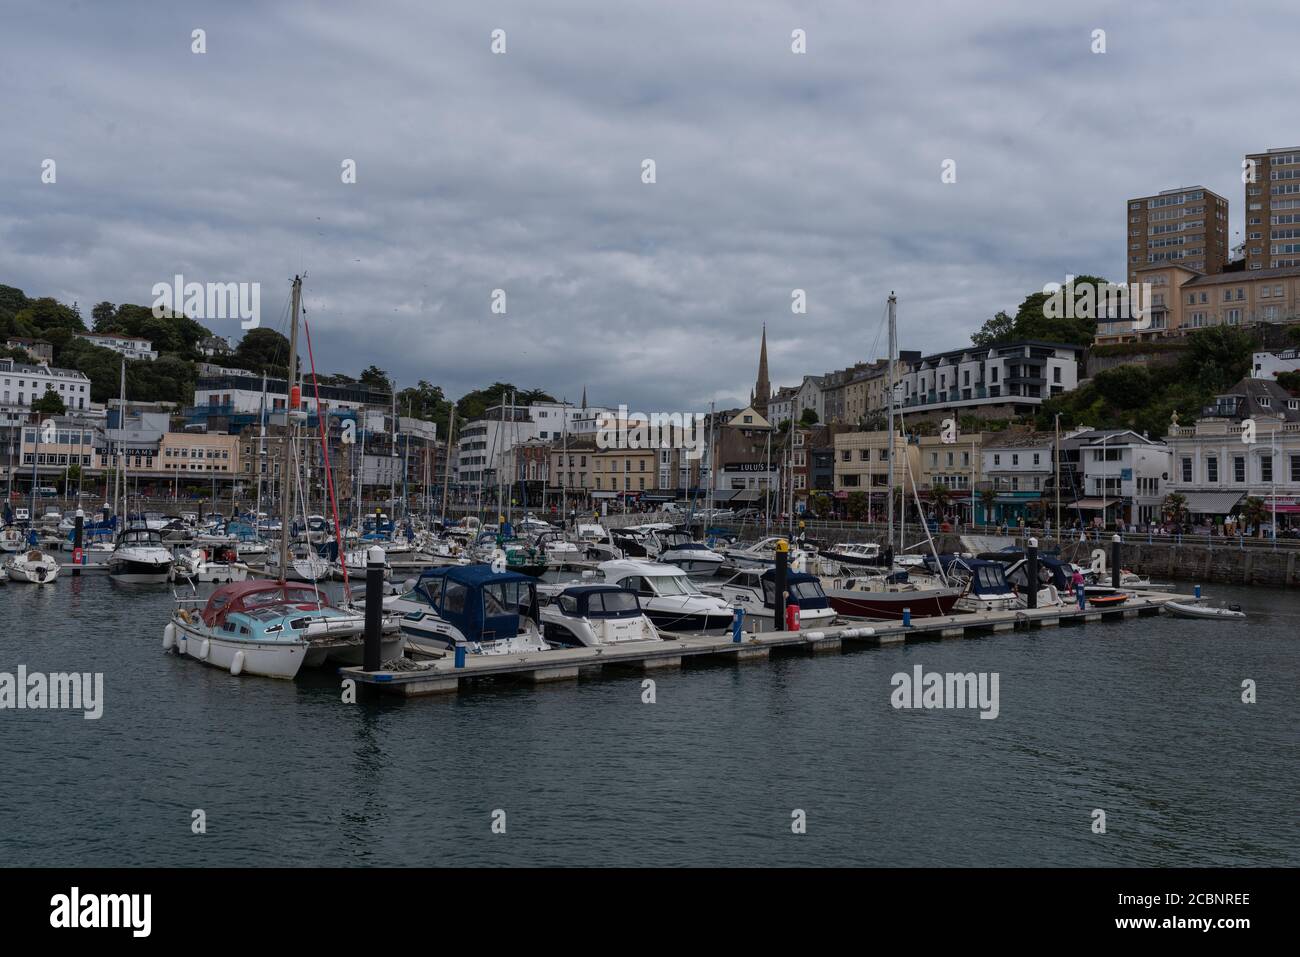 Torquay harbour on a bright cloudy day Stock Photo